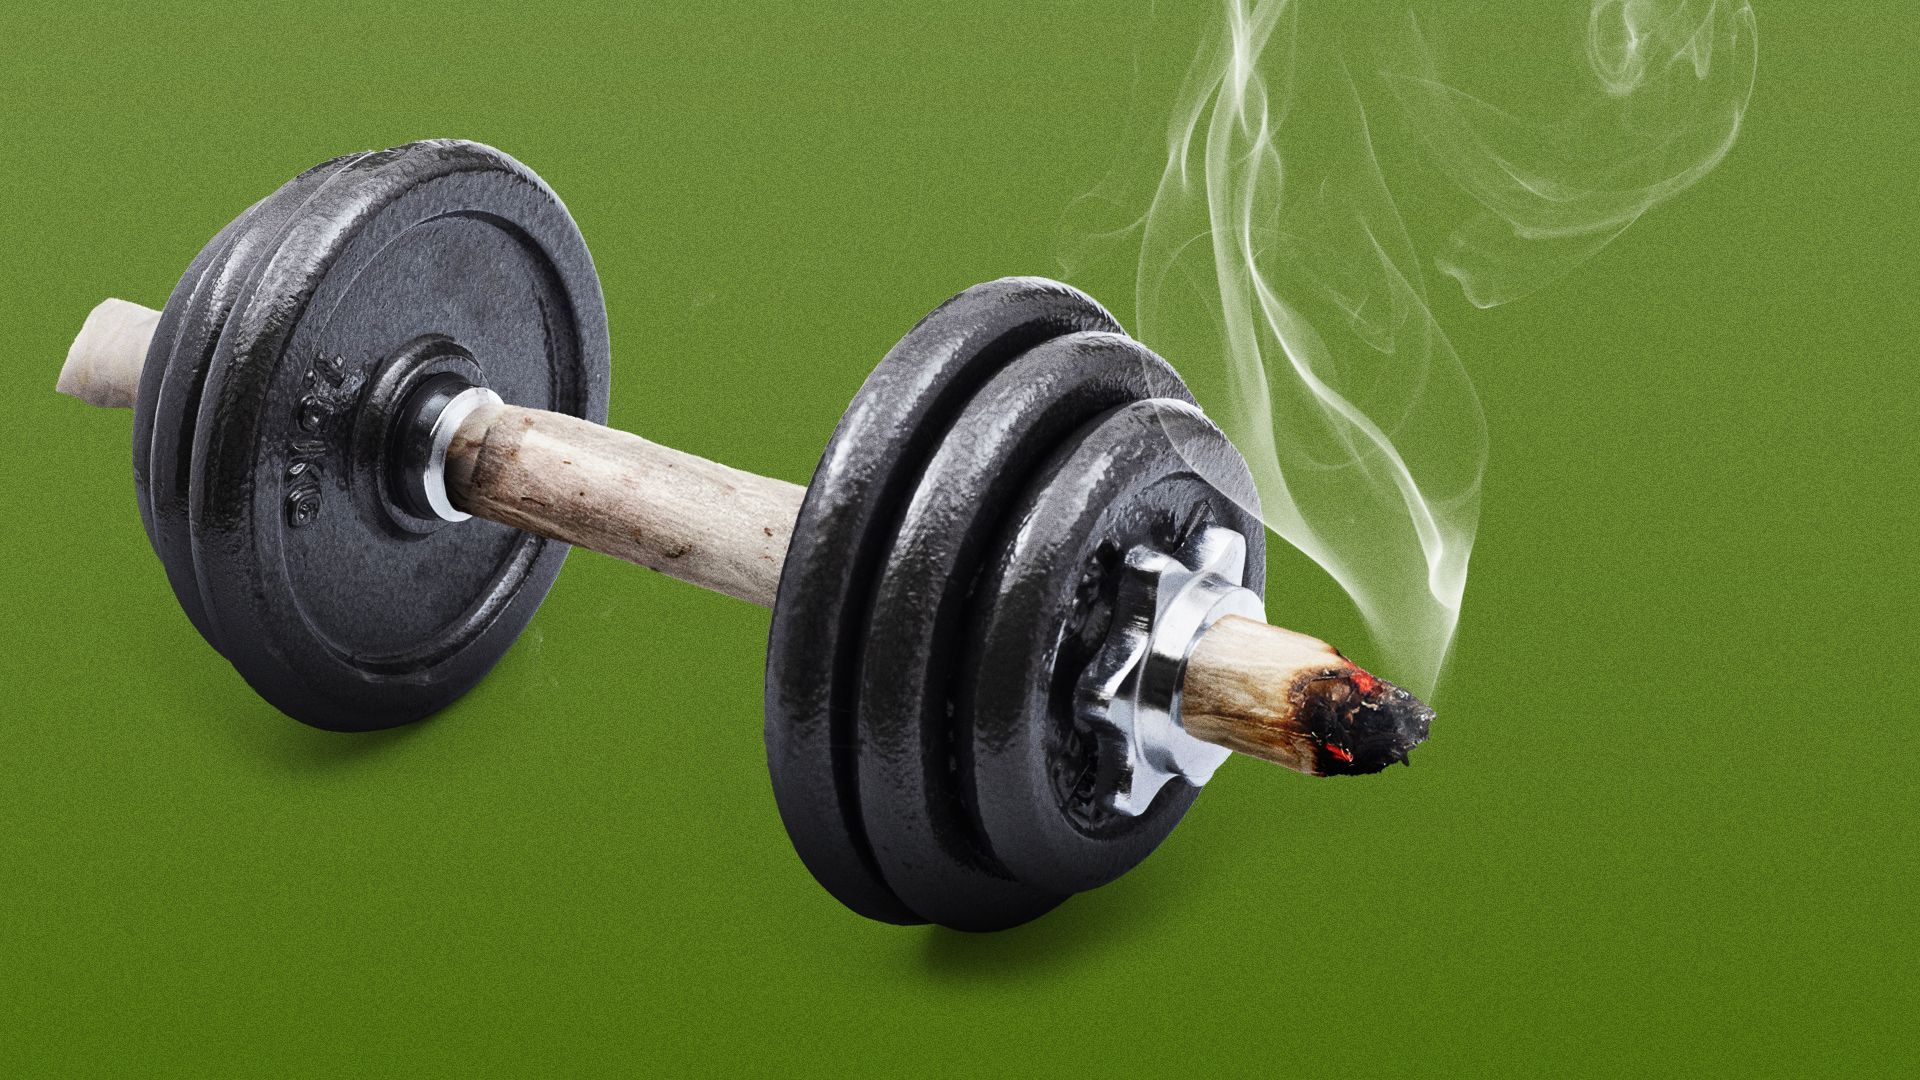 Illustration of dumbells with a marijuana joint as the handle.